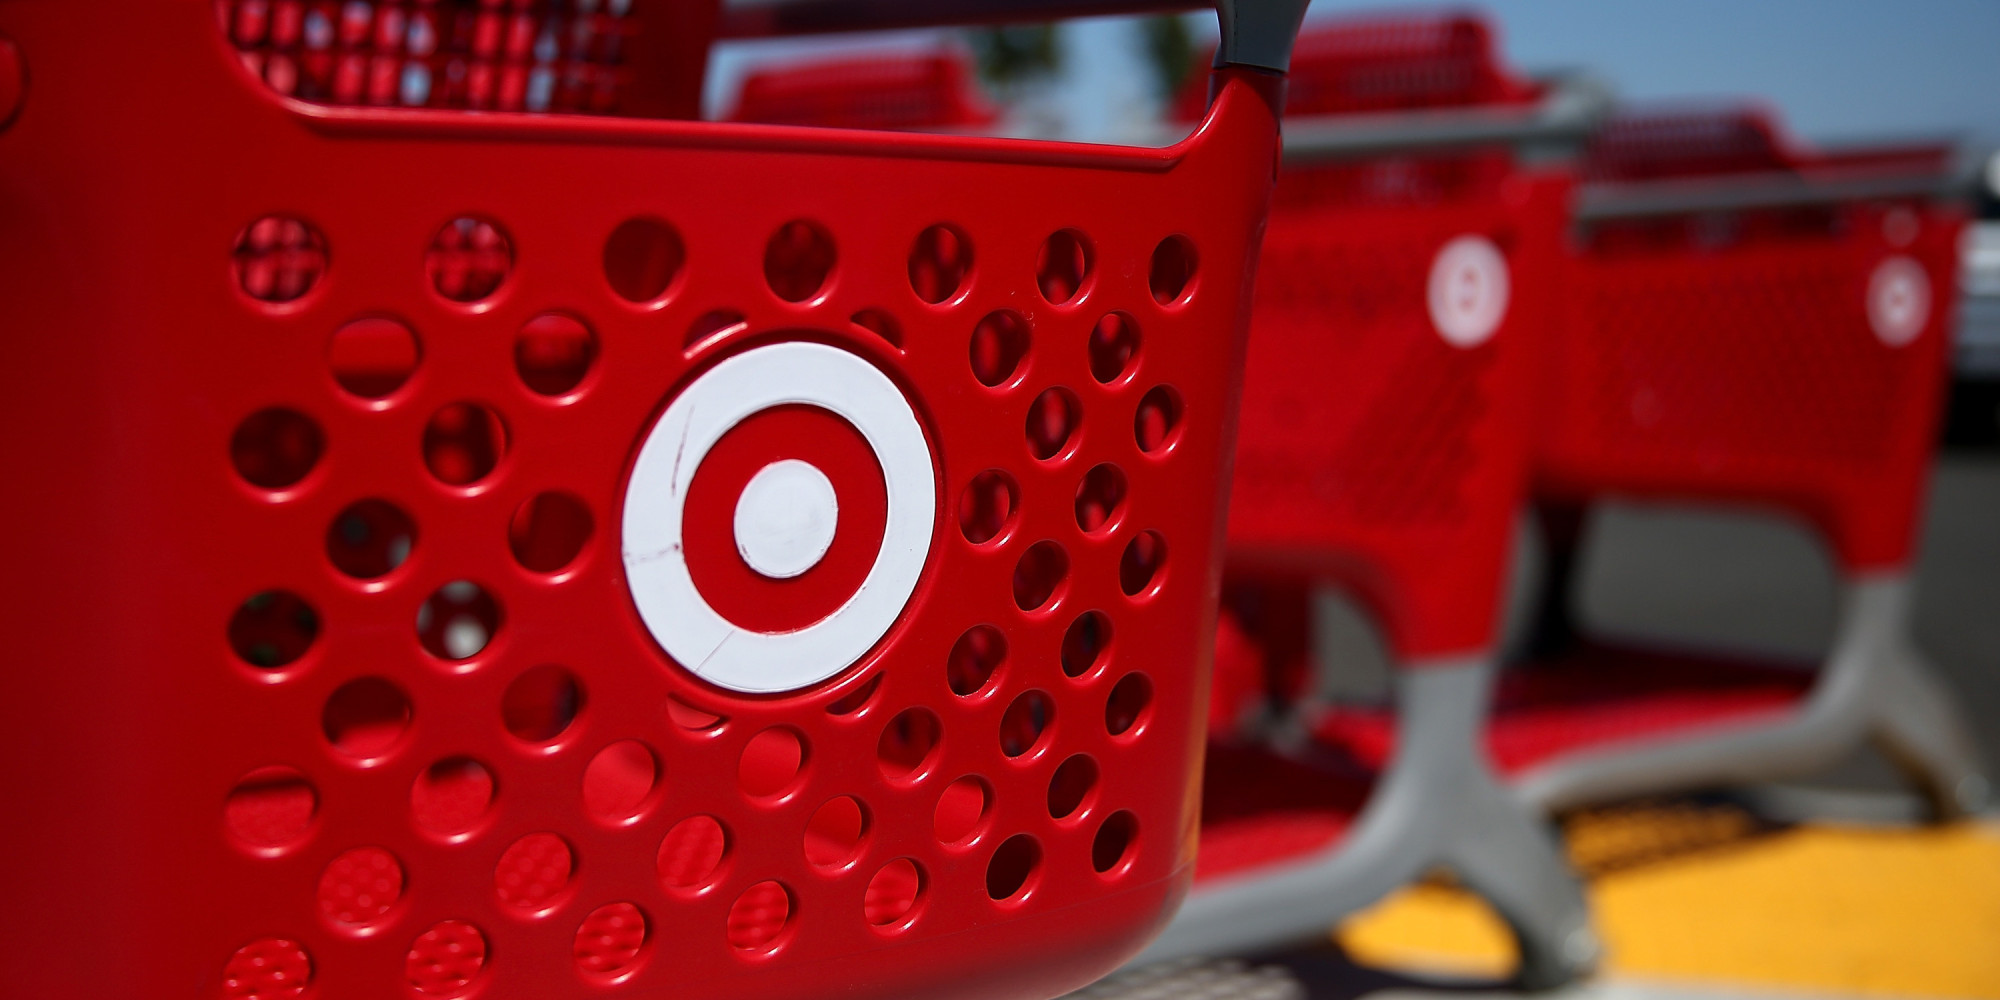 Target Profit Plunges 62 Percent | HuffPost